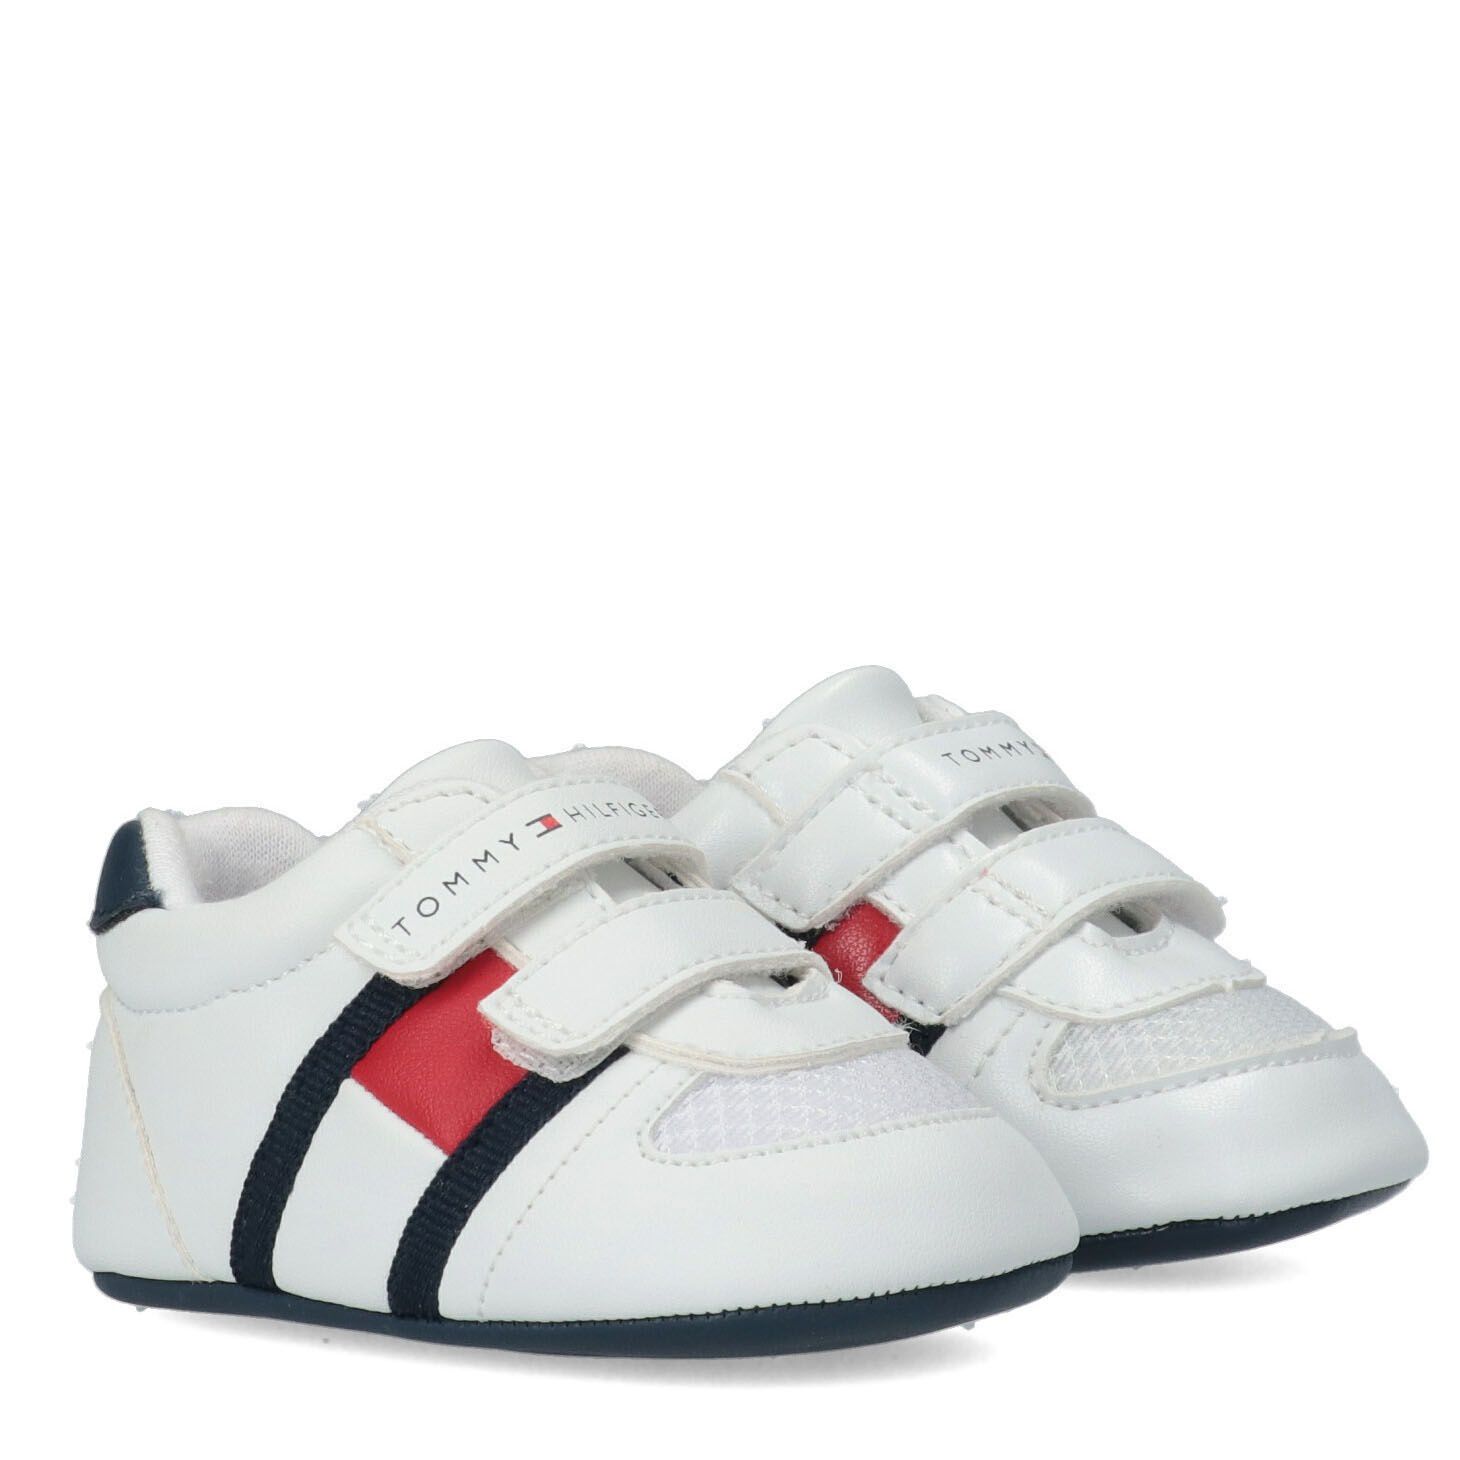 TOMMY HILFIGER BOYS White Trainers 